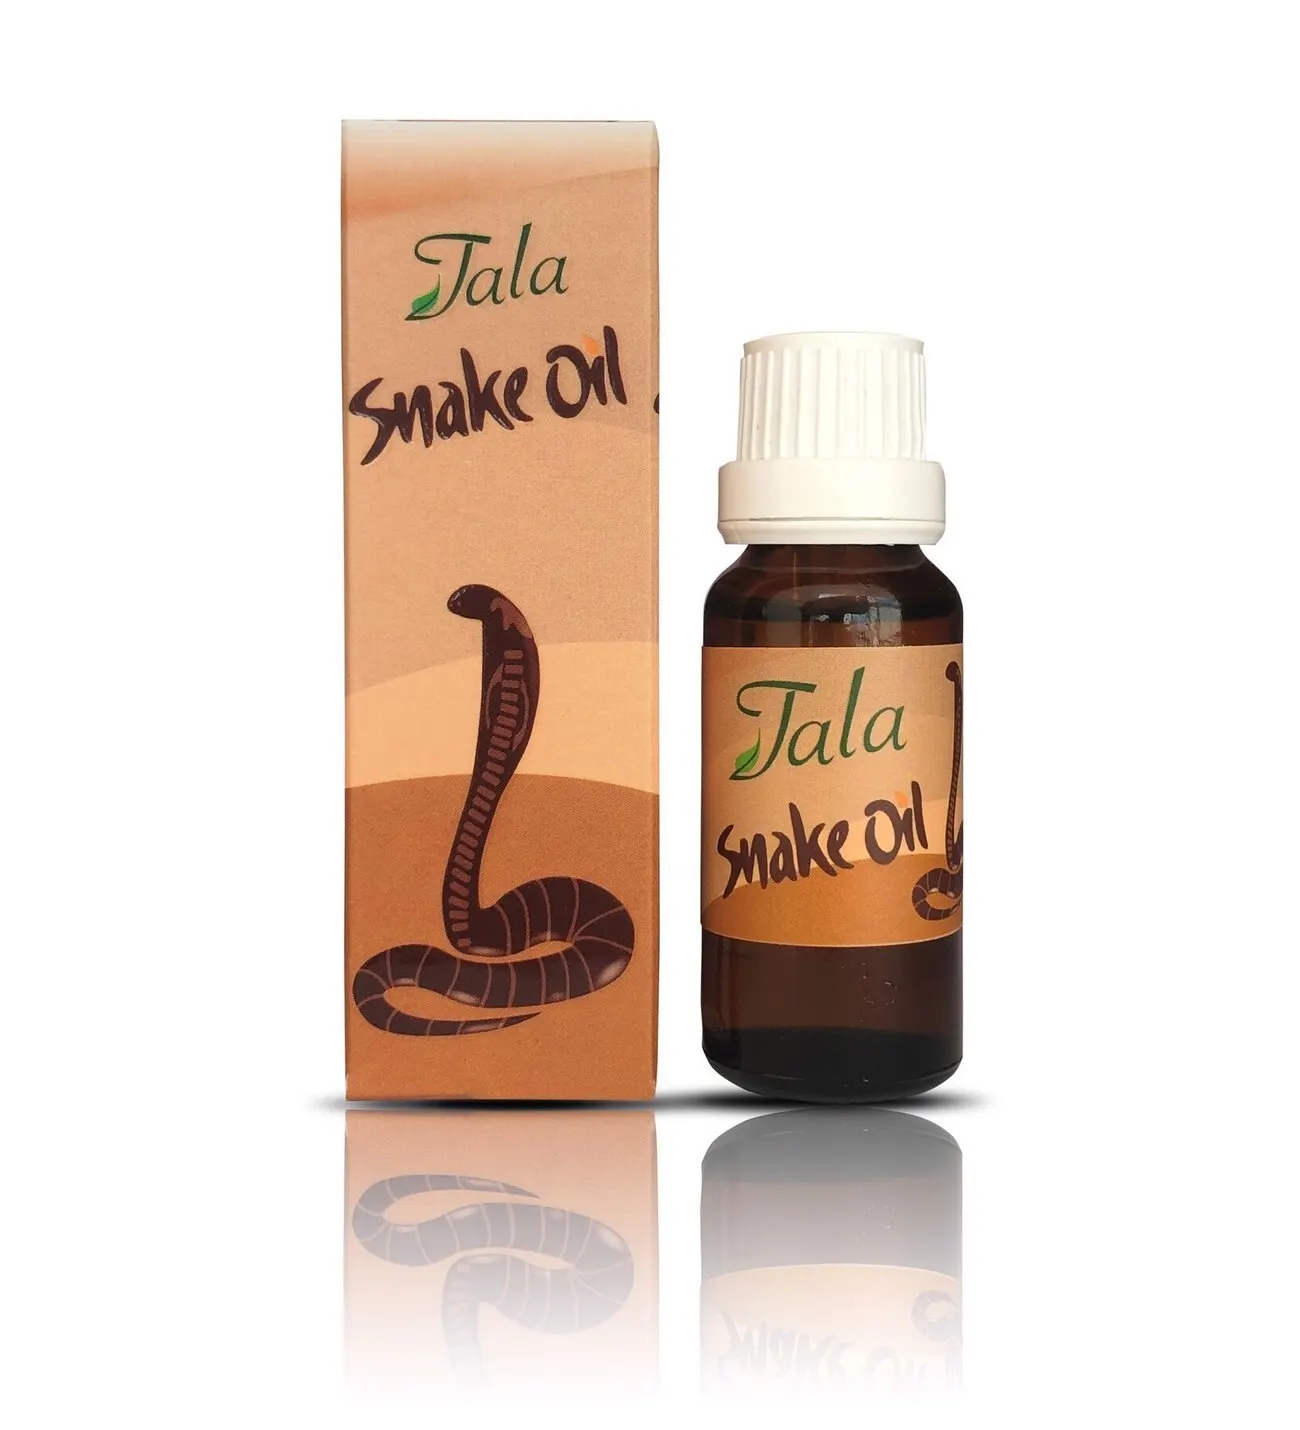 Tala Snake Oil 20 ML Hair Growth Vice Permanent Solution For Loss Hair The Hair Follicles Free Shipping Original Treatment Natural Vitamin Strong inherent vice